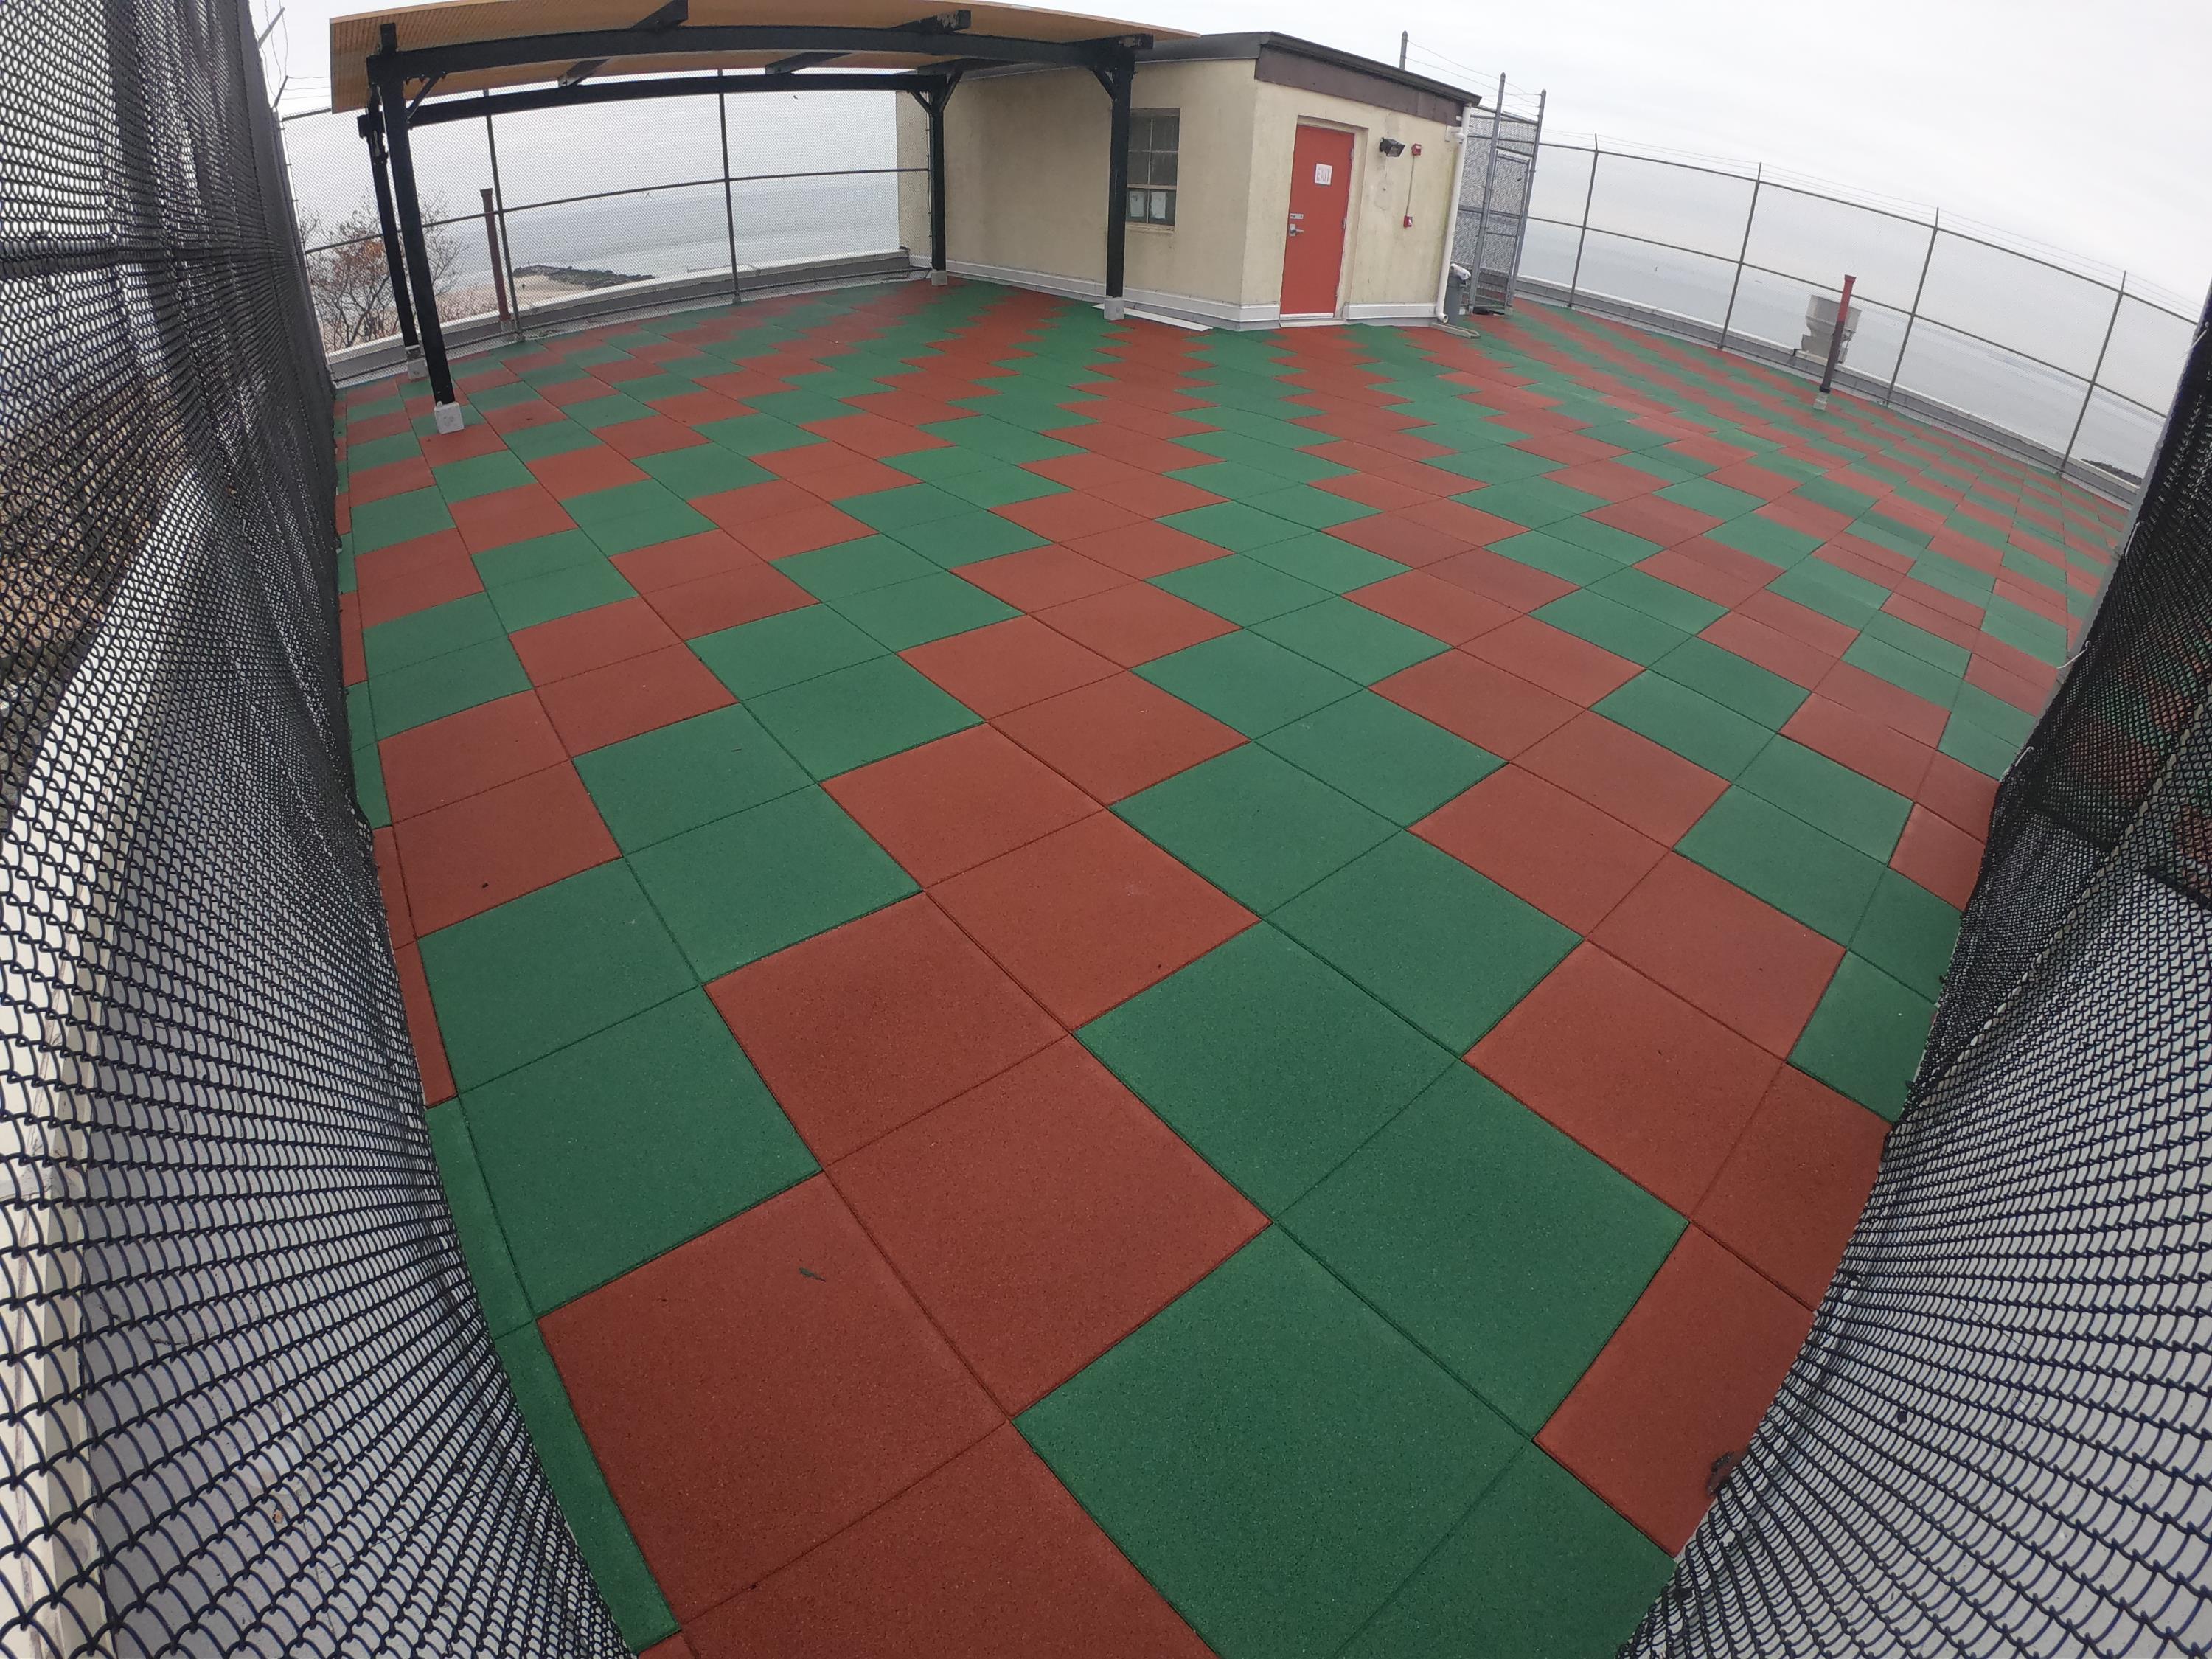    PAL School Rooftop Playground Tiles MAIN